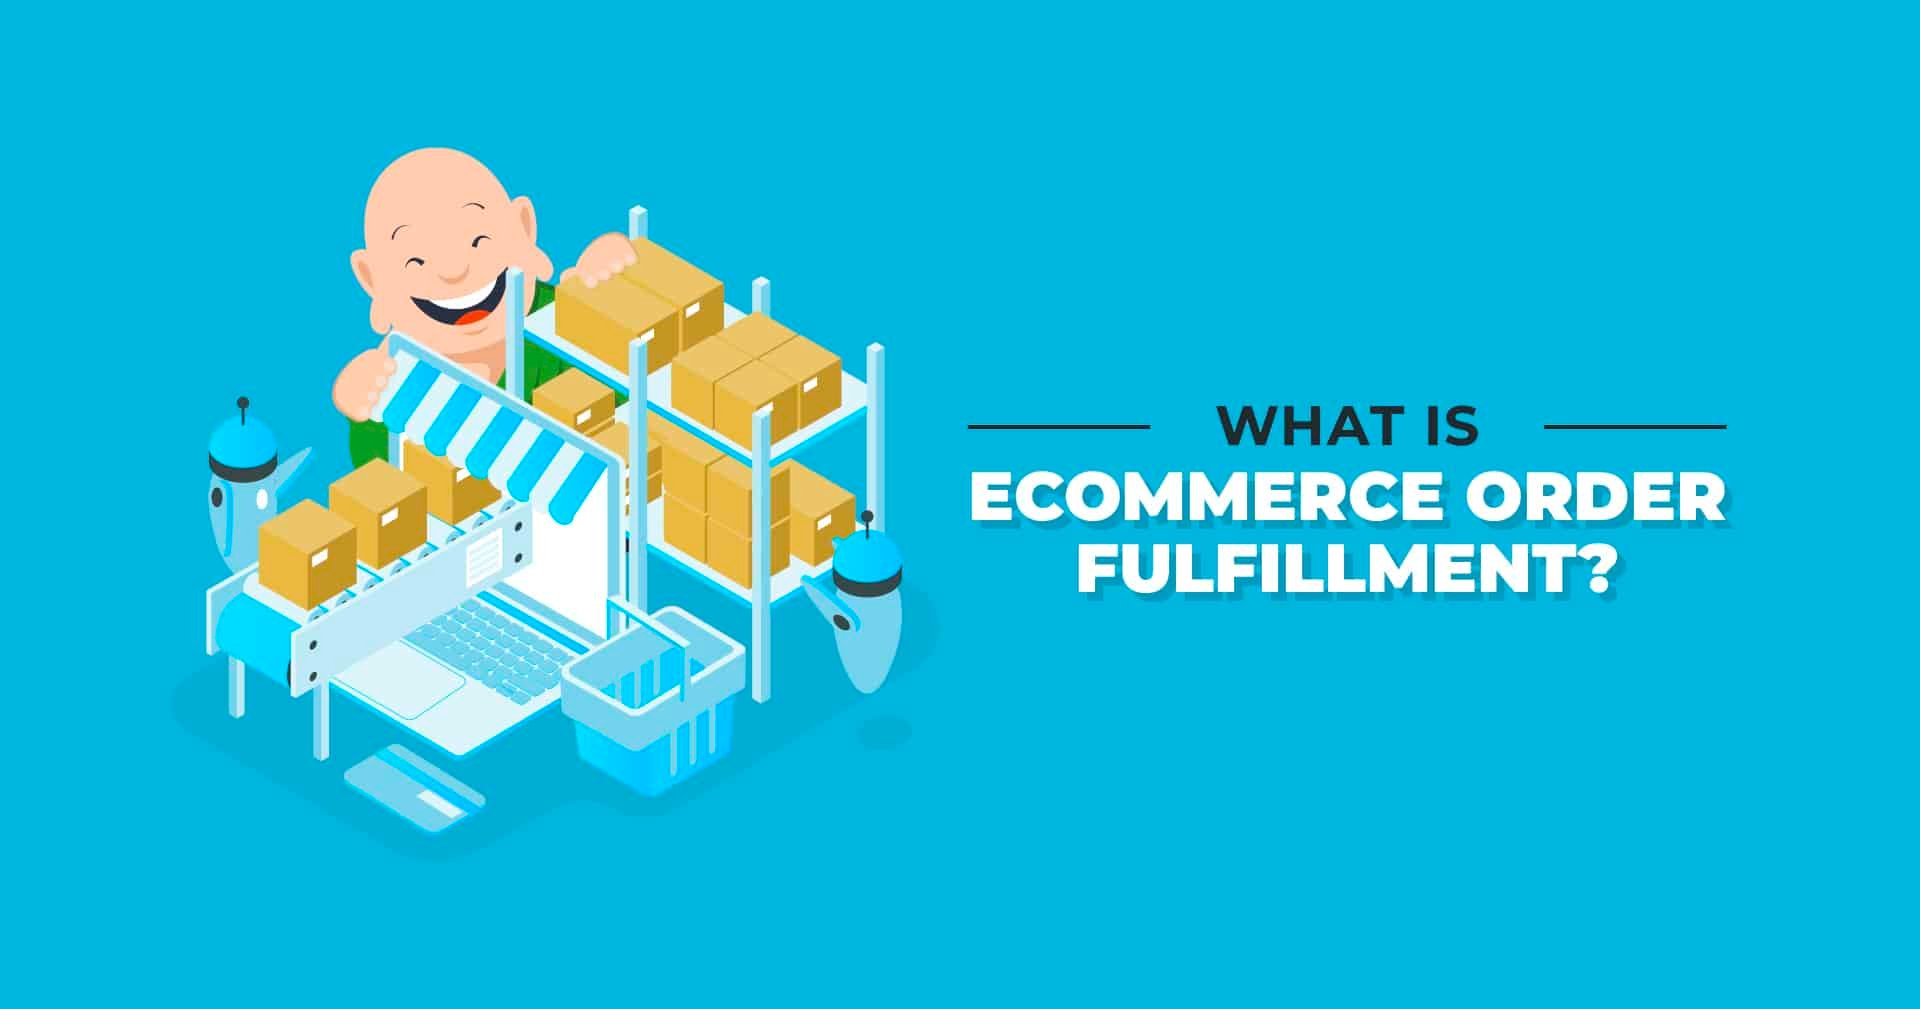 What is eCommerce Order Fulfillment?